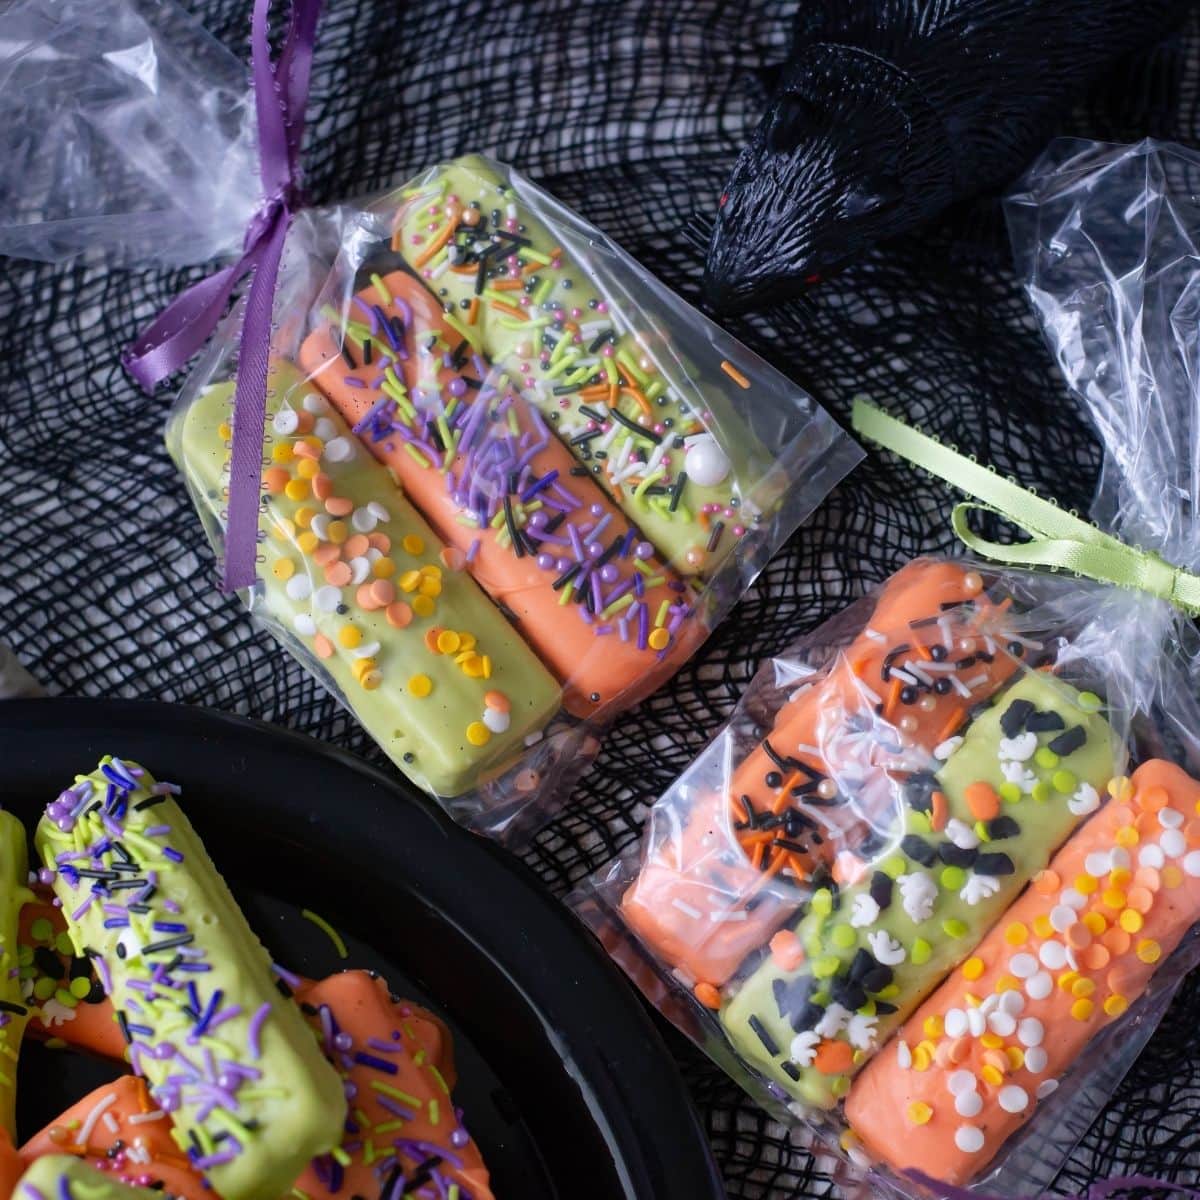 Decorated Halloween Cookies in gift bags.